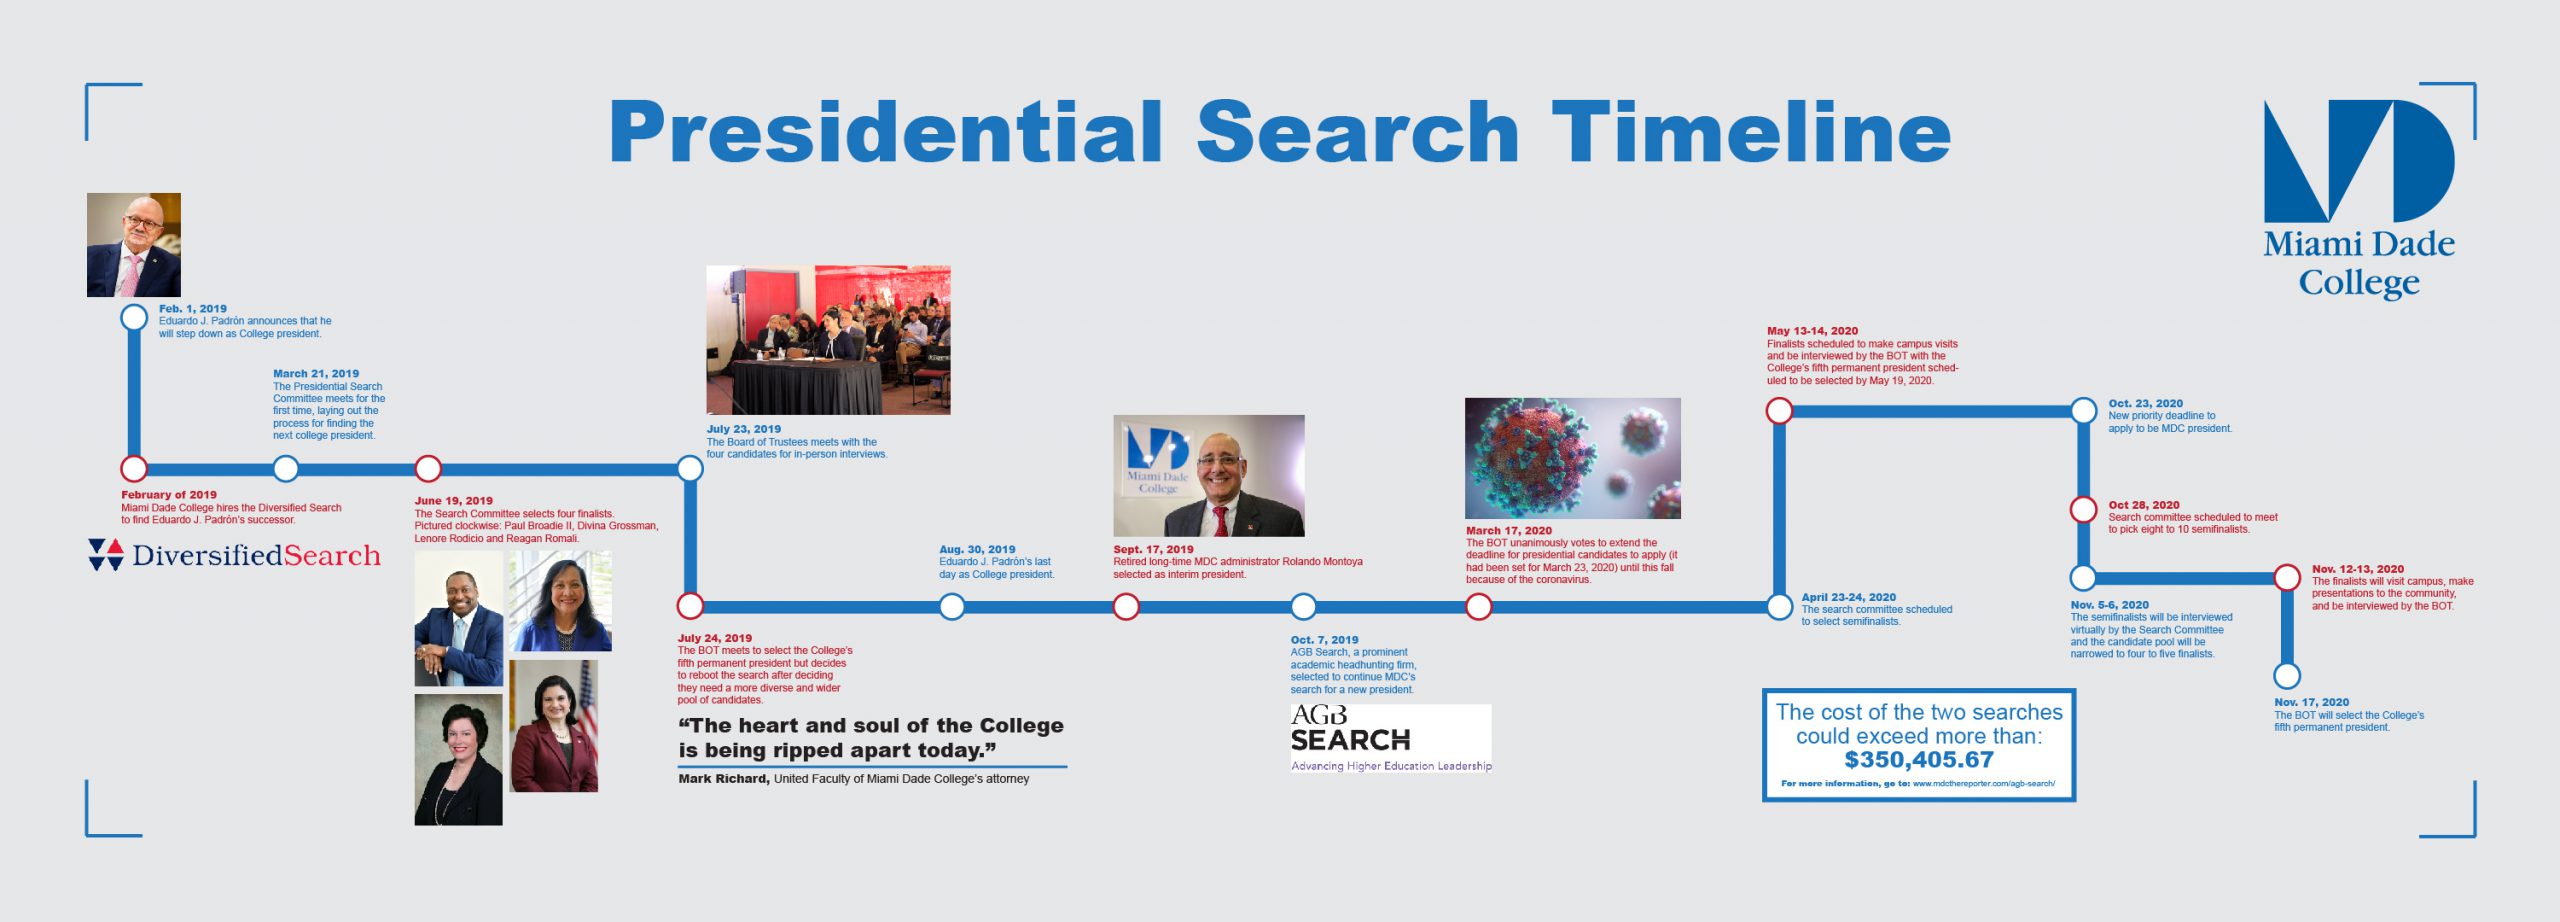 Presidential search timeline.